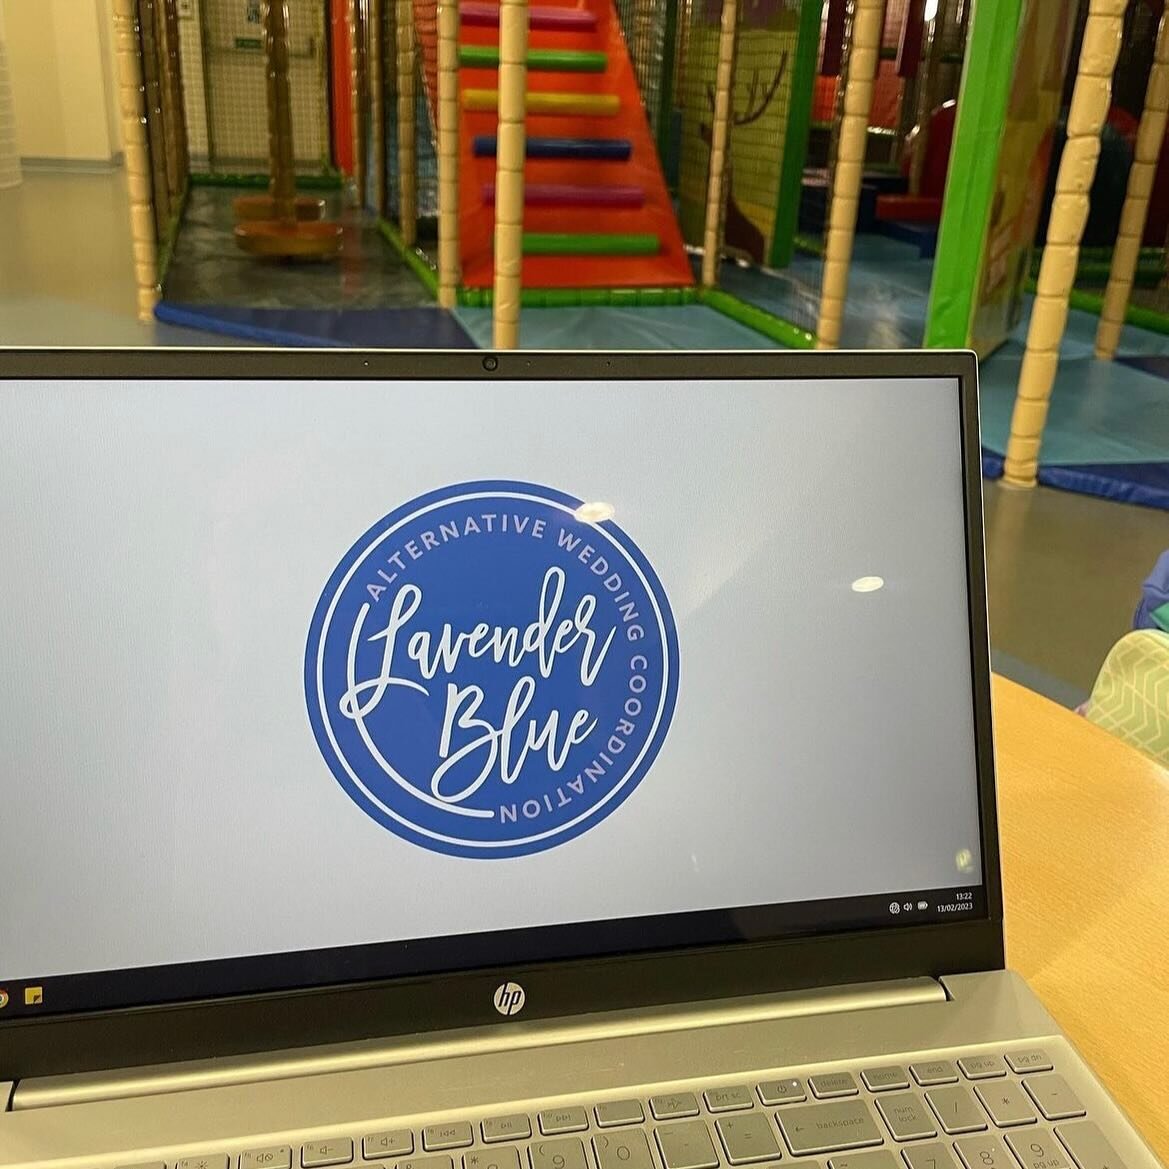 It&rsquo;s the school holidays and my usual happy, colourful office has been replaced by soft play&hellip;
.
Please accept my apologies if you&rsquo;re waiting on an email from me, I have limited time at my desk this week.
.
I&rsquo;m also away at th